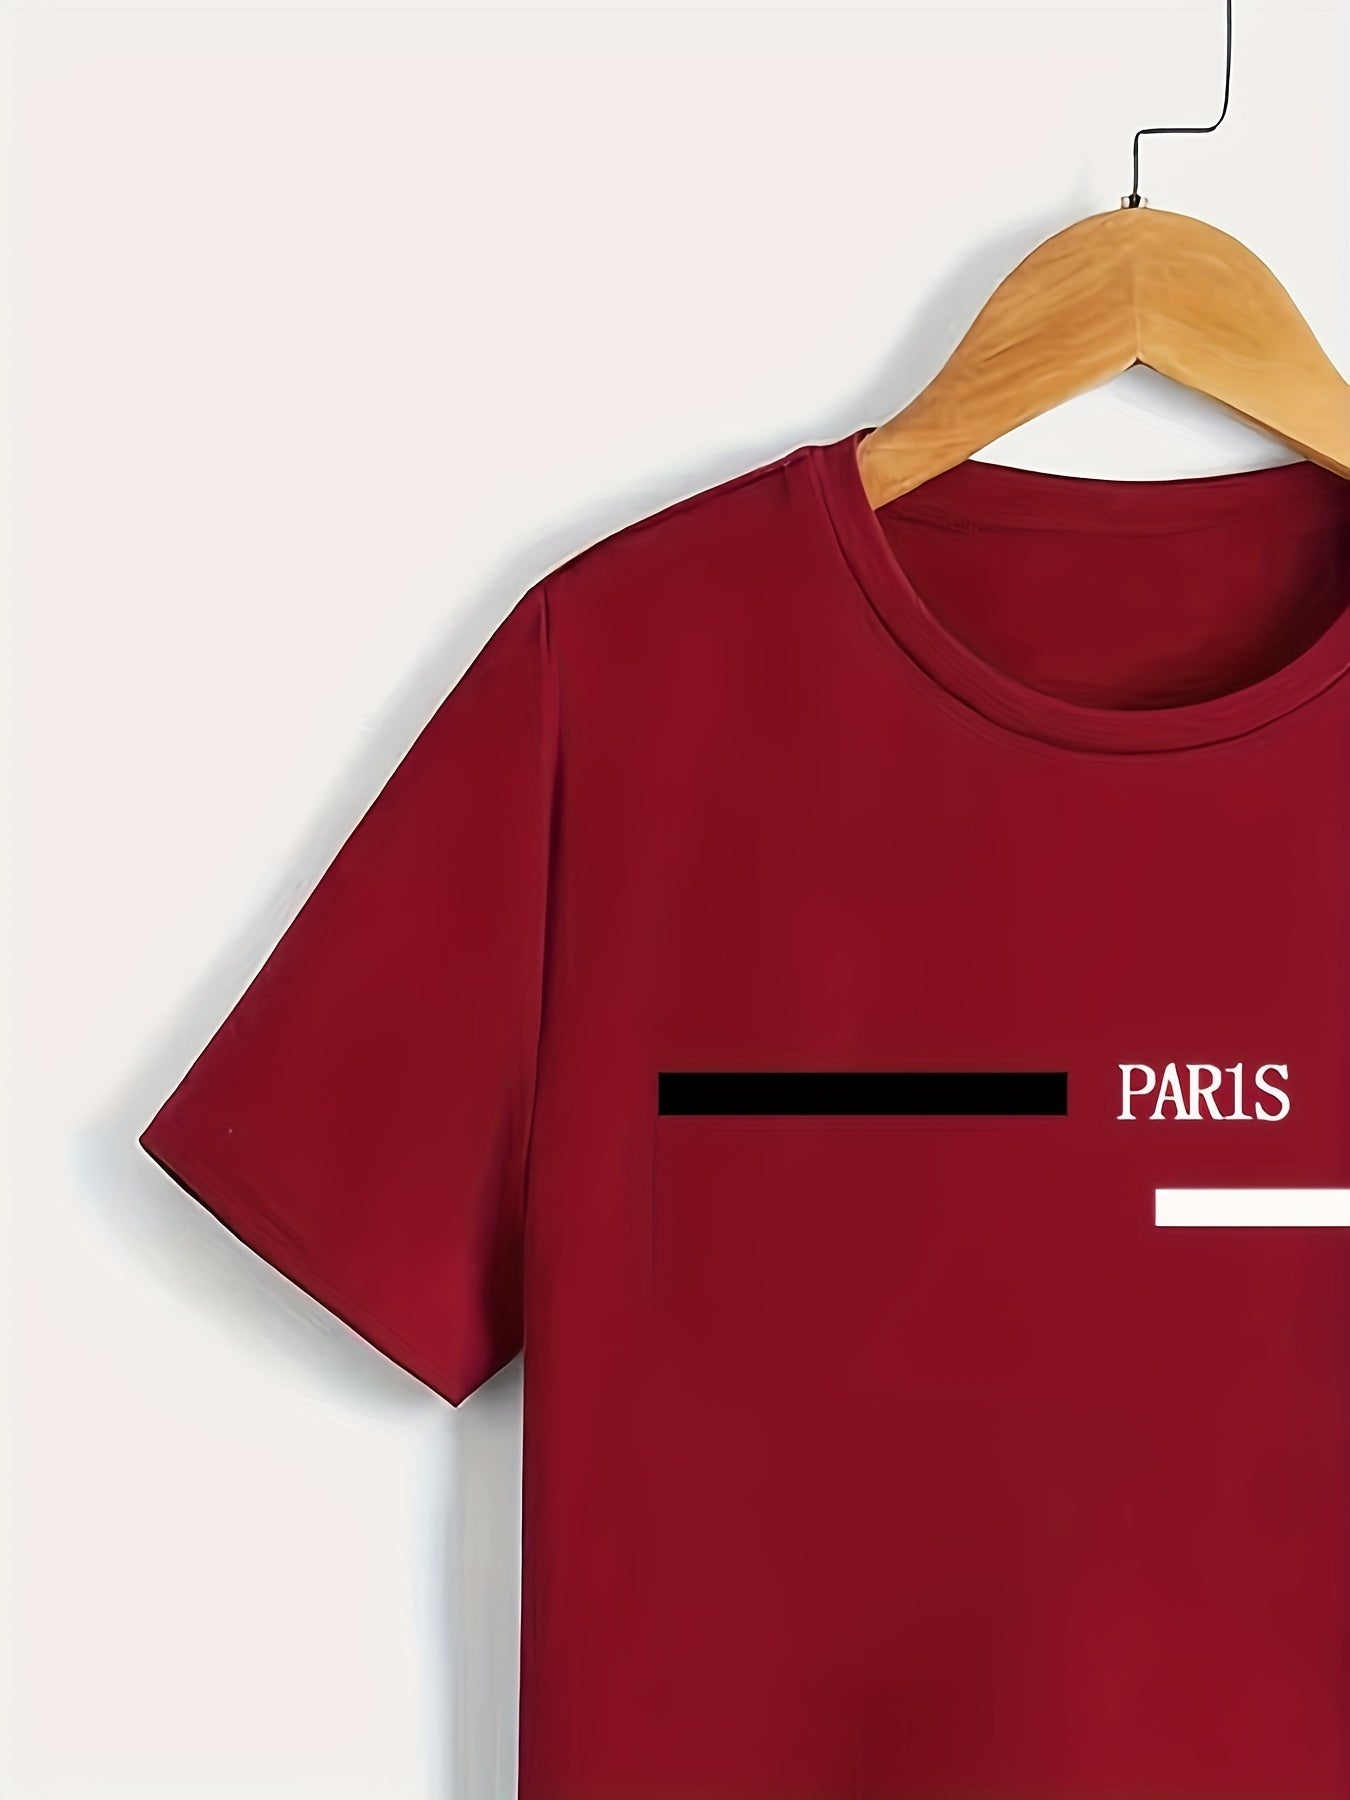 Trendy PARIS Letter And Stripe Print Boys Creative T-shirt, Casual Lightweight Comfy Short Sleeve Tee Tops, Kids Clothes For Summer